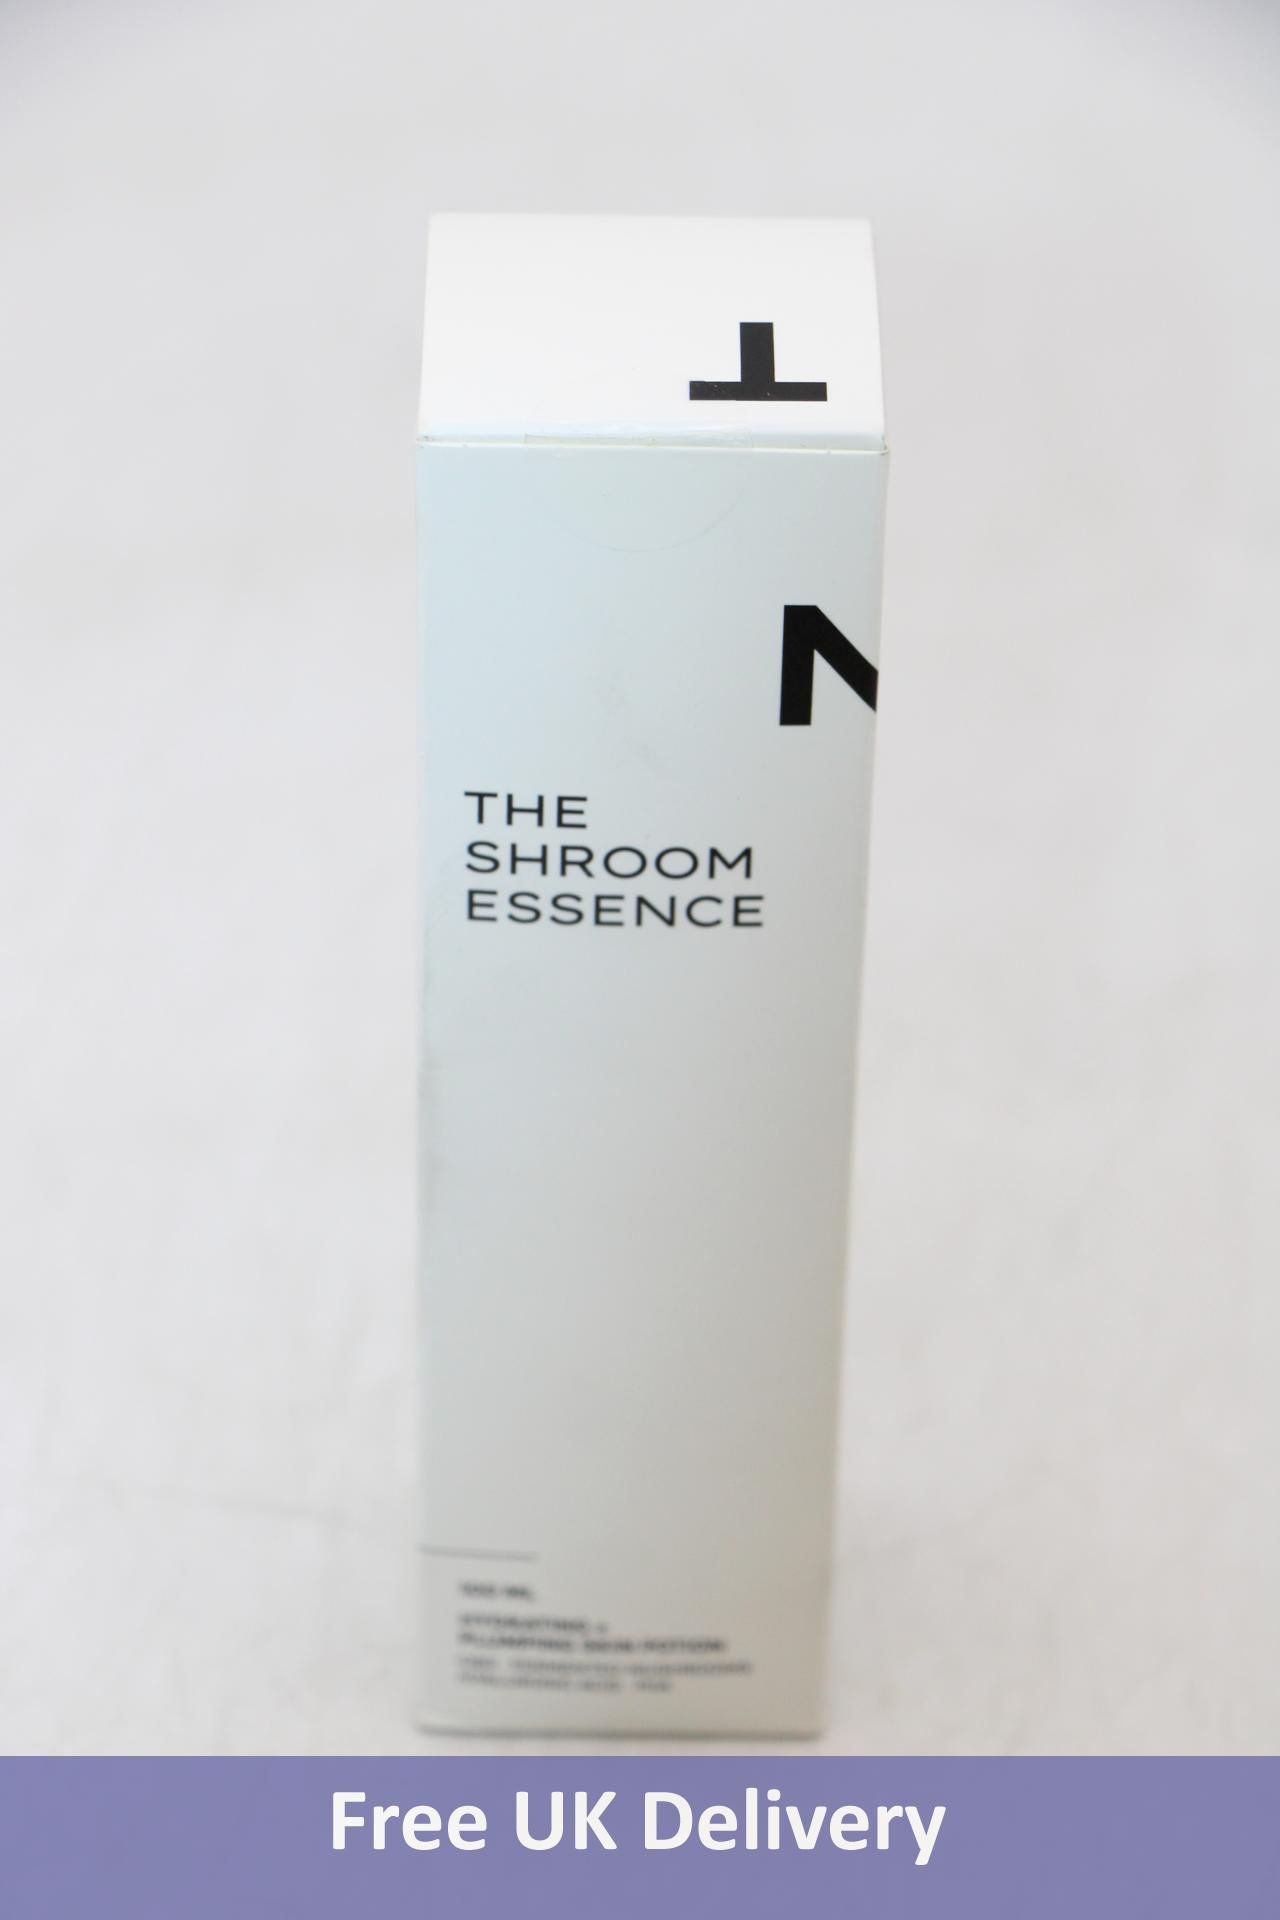 Seven Mantle The Shroom Essence Bottle Hydrating x Plumping Skin Potion Cbd, Size 100ml - Image 6 of 7